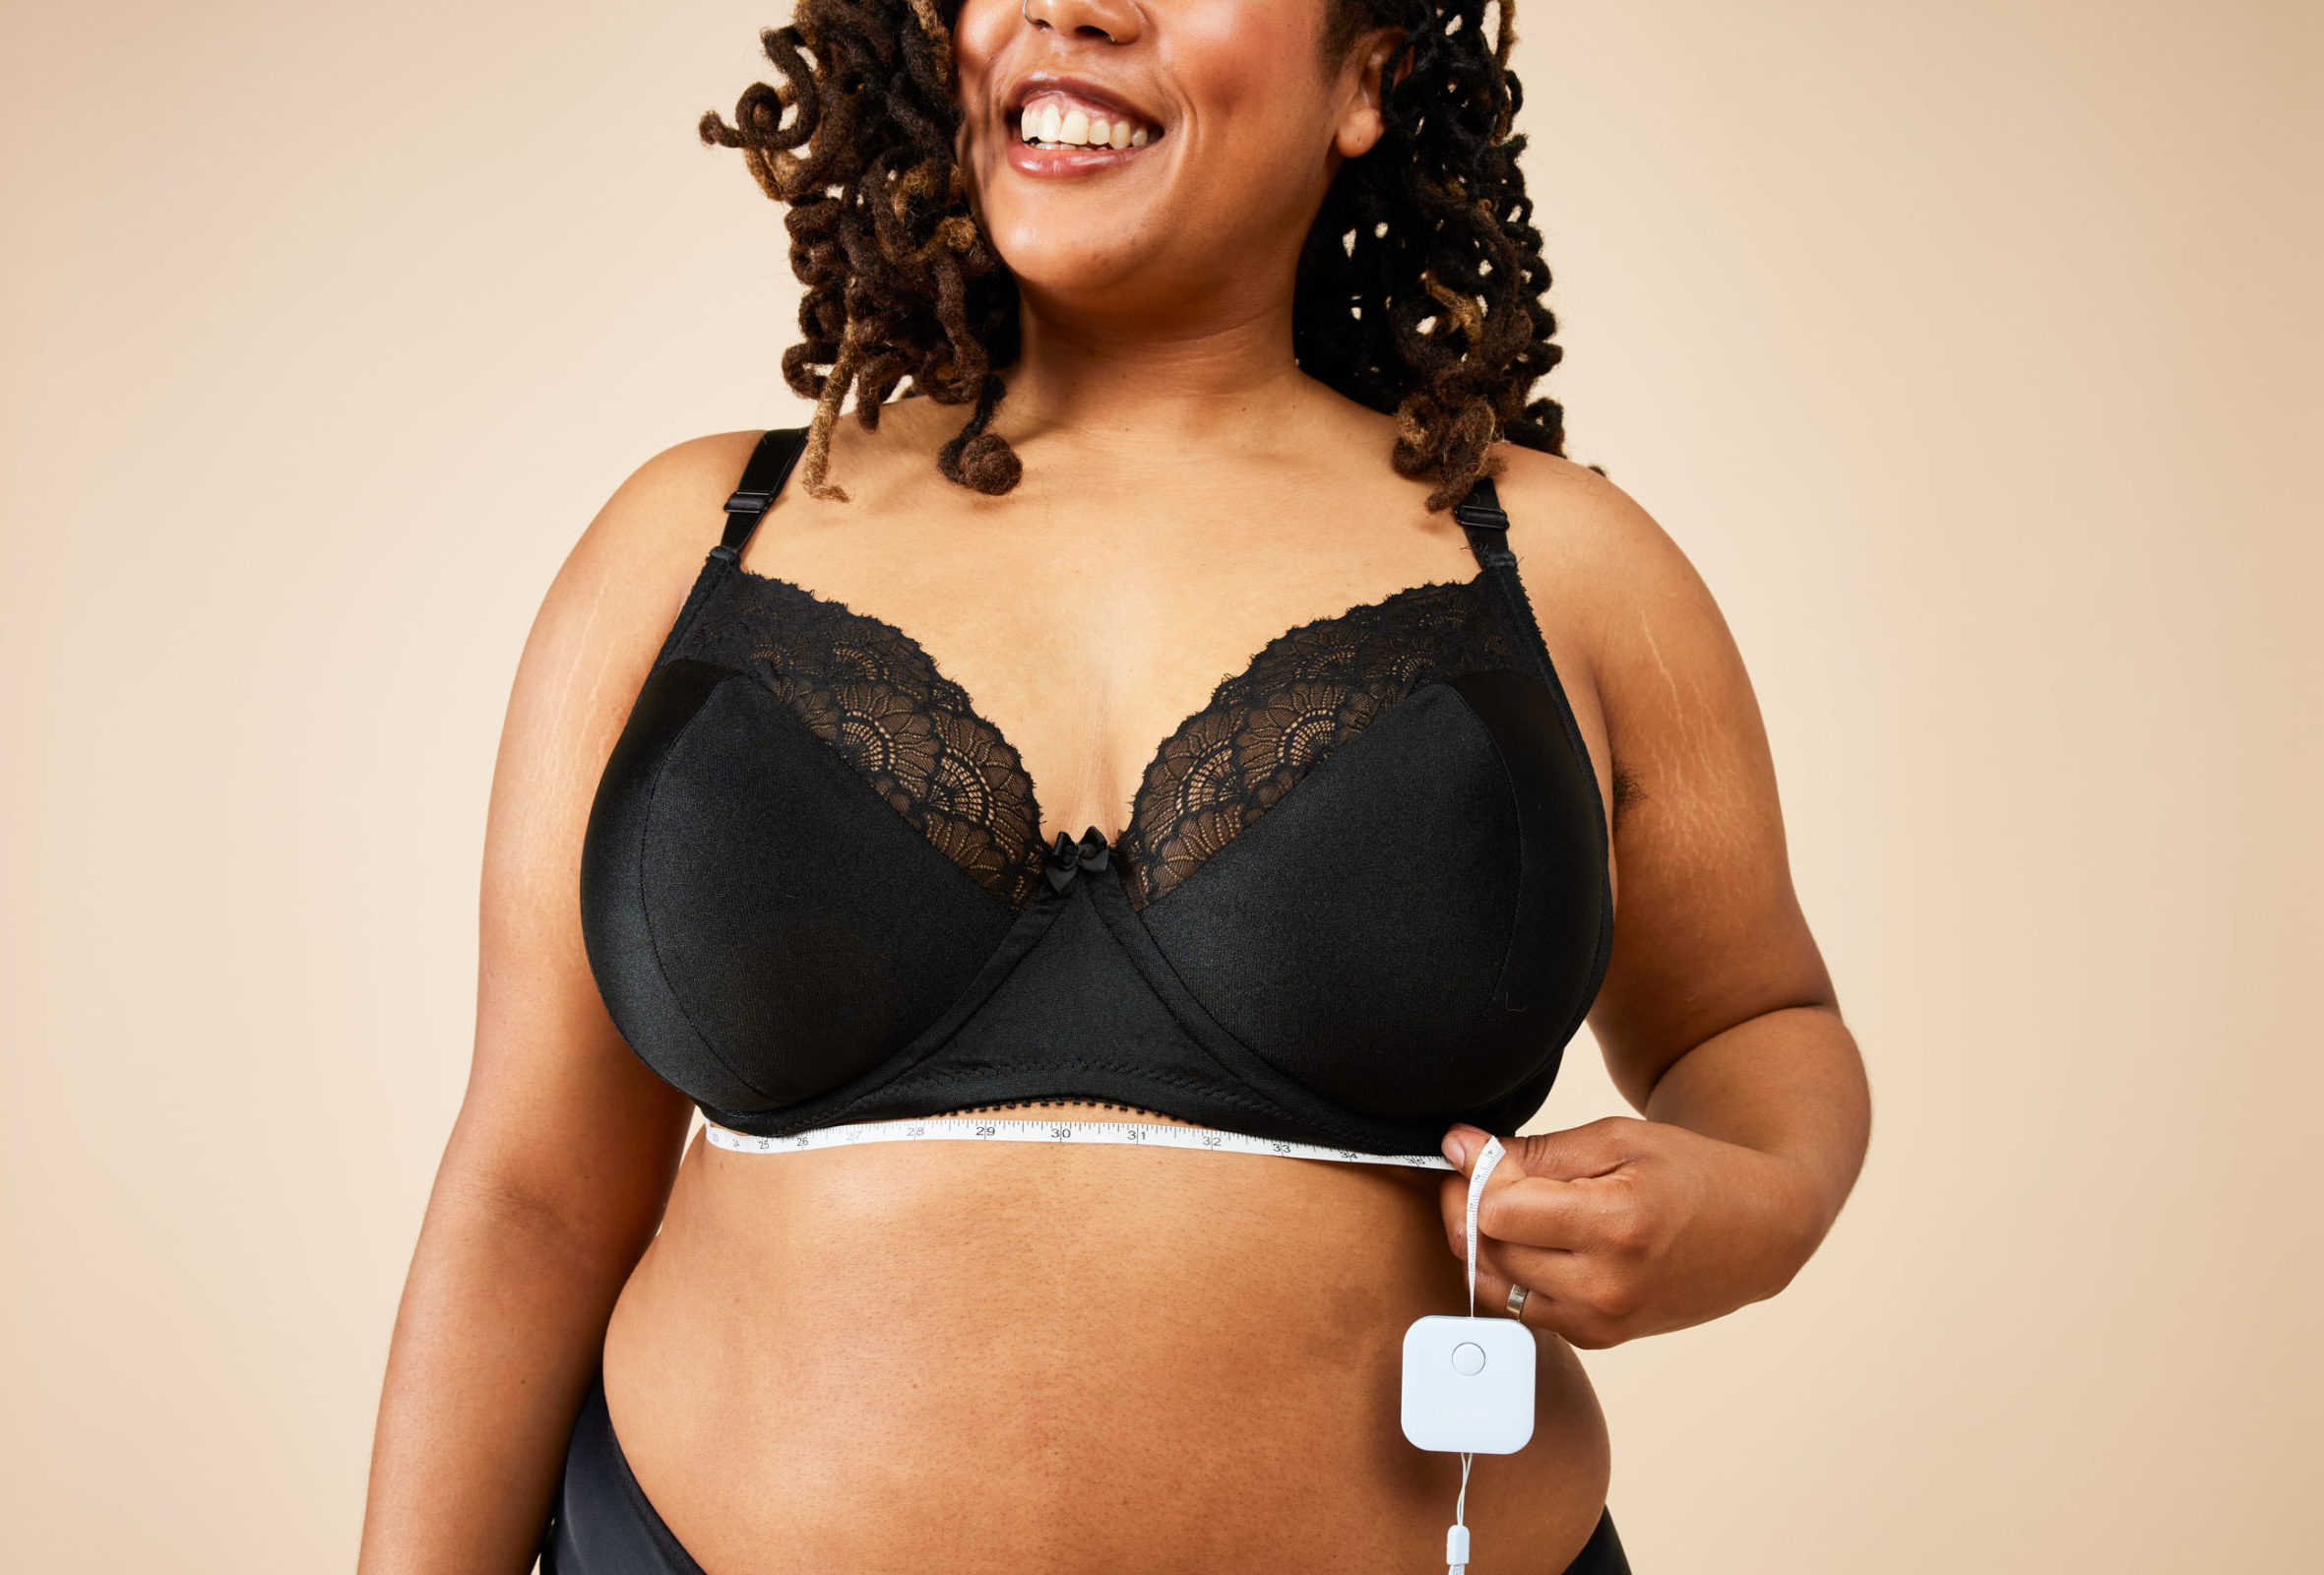 How to sew a bra that fits: A bra fitting guide for large busts